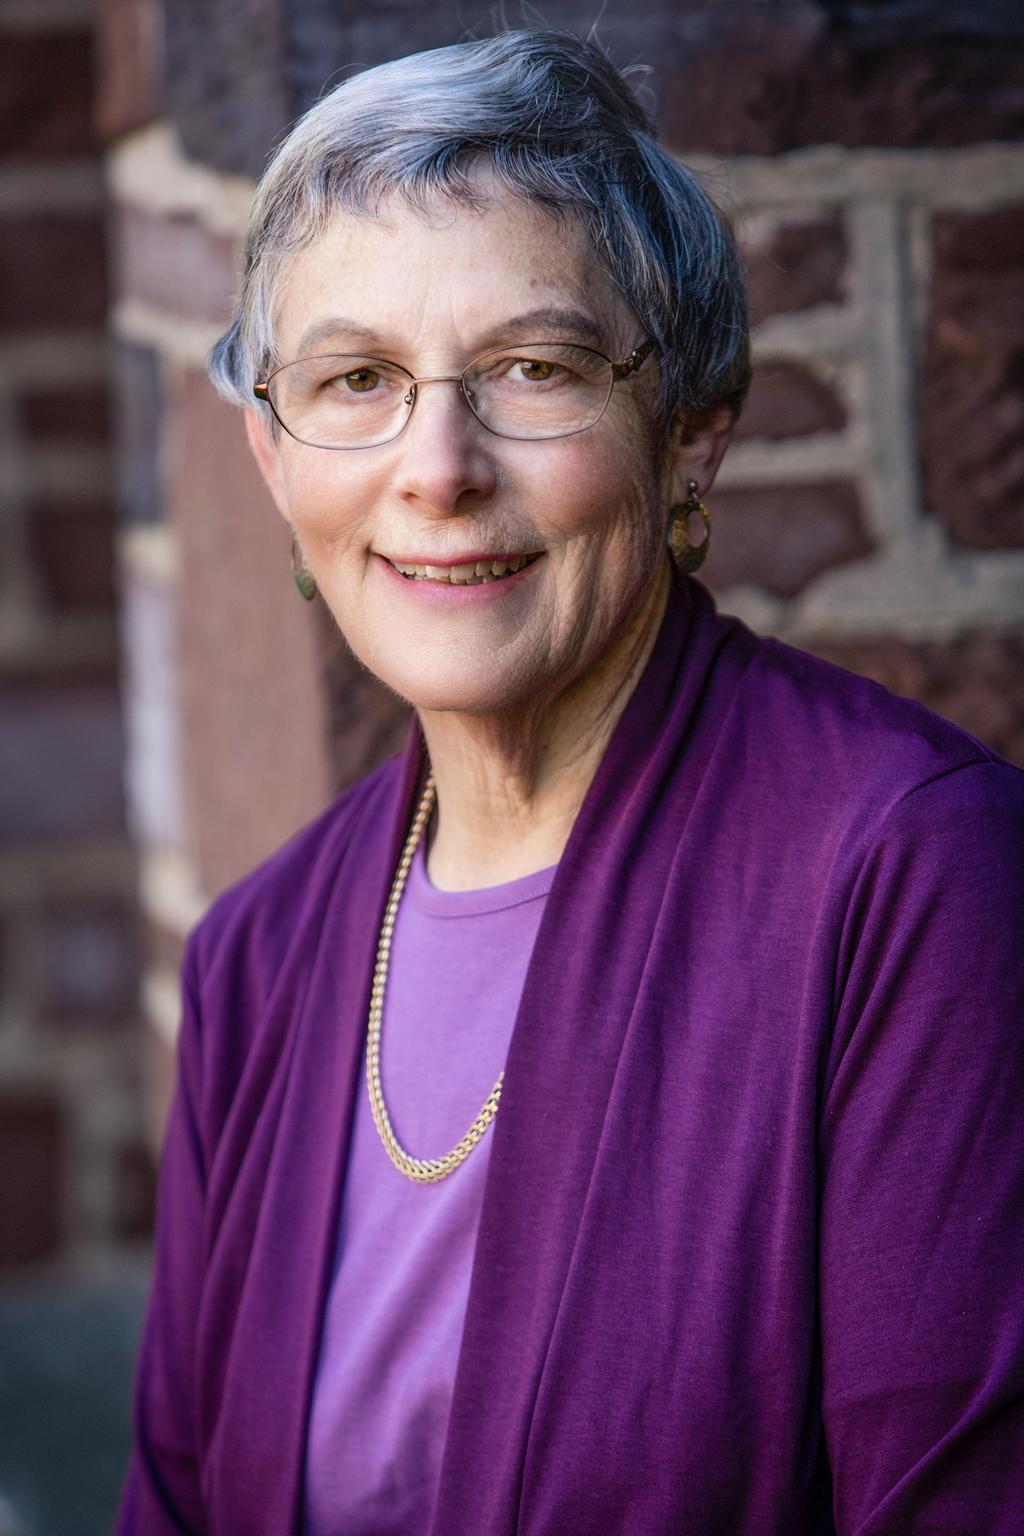 Circle of Friends Meets Tuesday November 13th at 10:30AM in Fellowship Hall Our speaker this month is Professor Katharine Doob Sakenfeld, Professor of Old Testament, Emerita, retired from Princeton